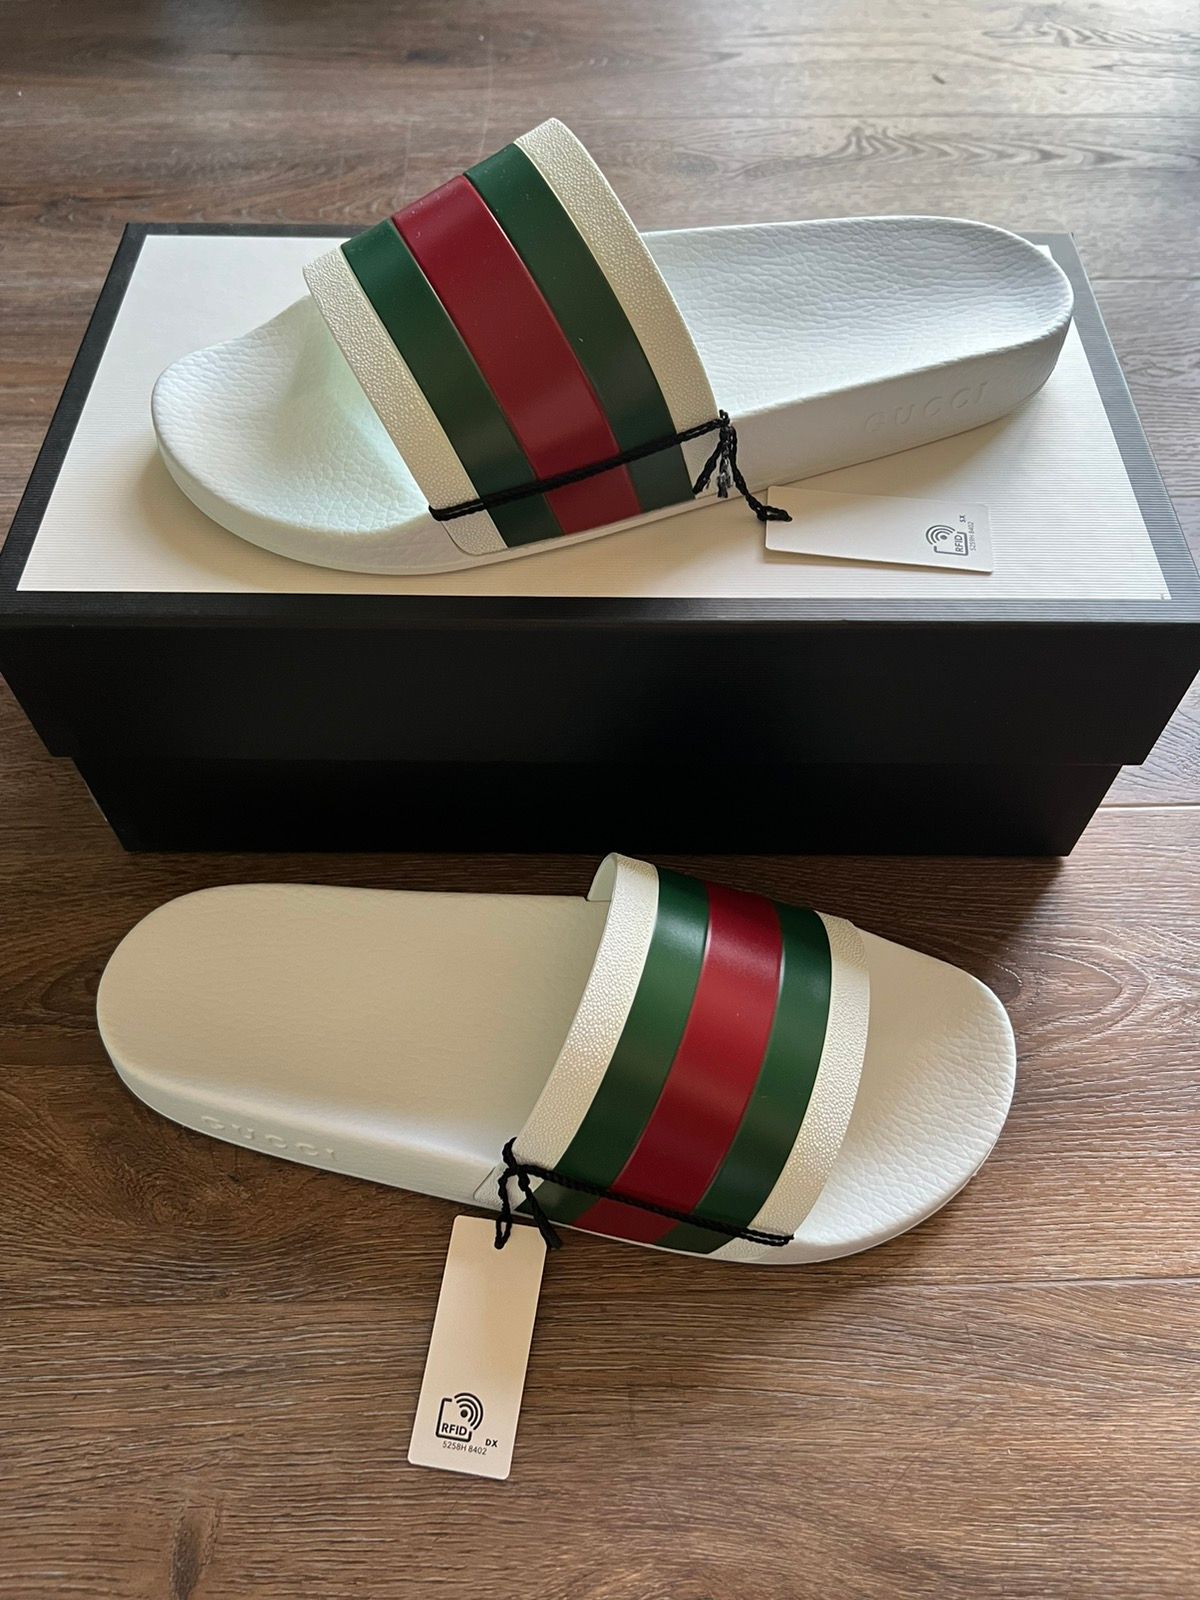 Pre-owned Gucci Flip Flop Slides Size 12 White Colorway